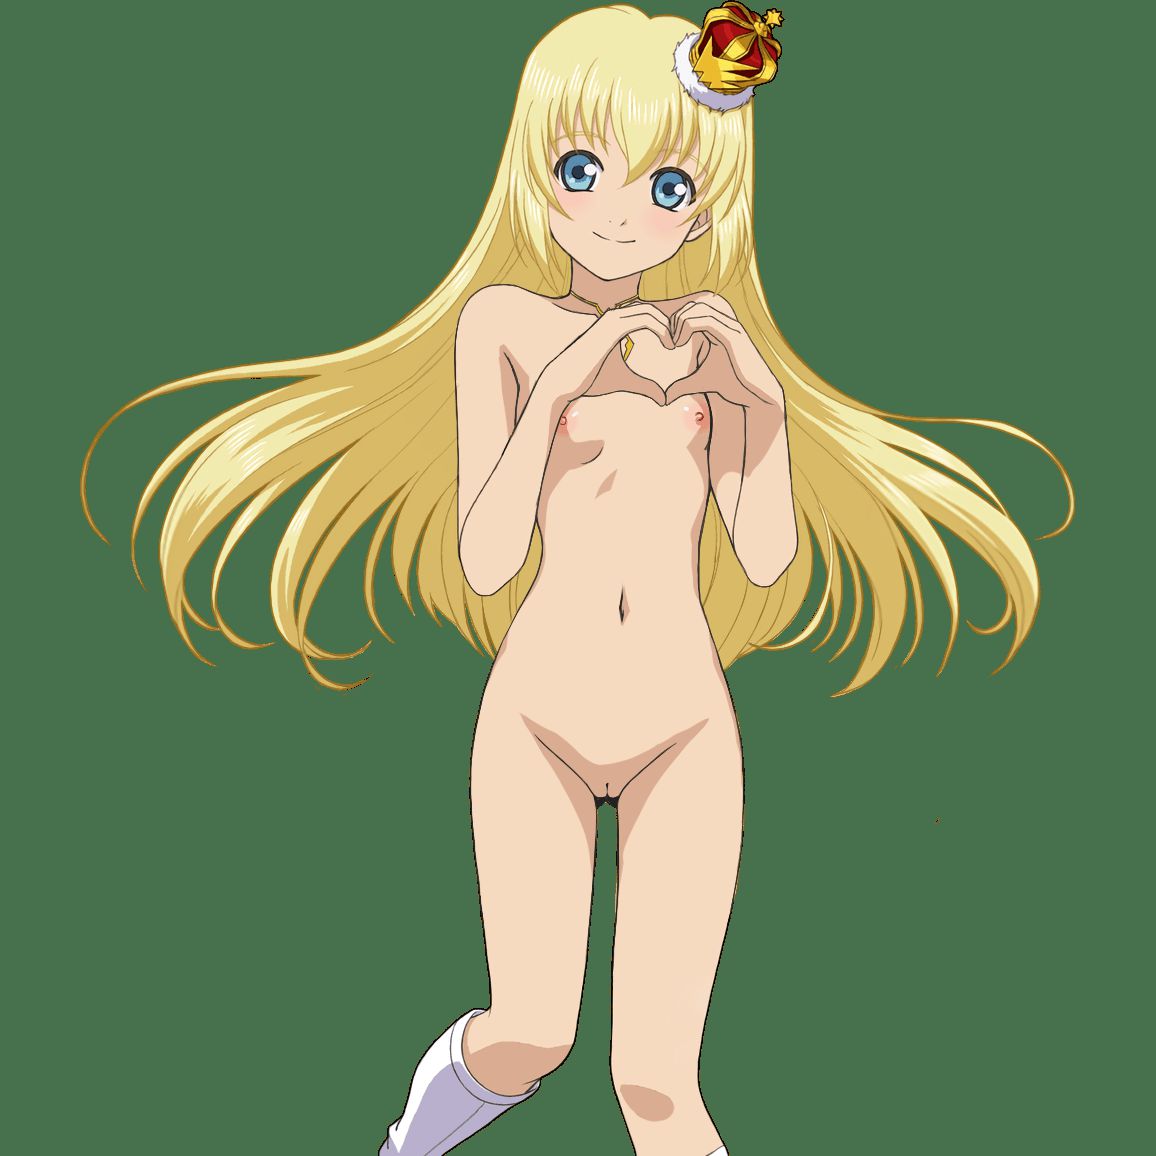 [Anime character material] png background of animated characters erotic images that 118 32